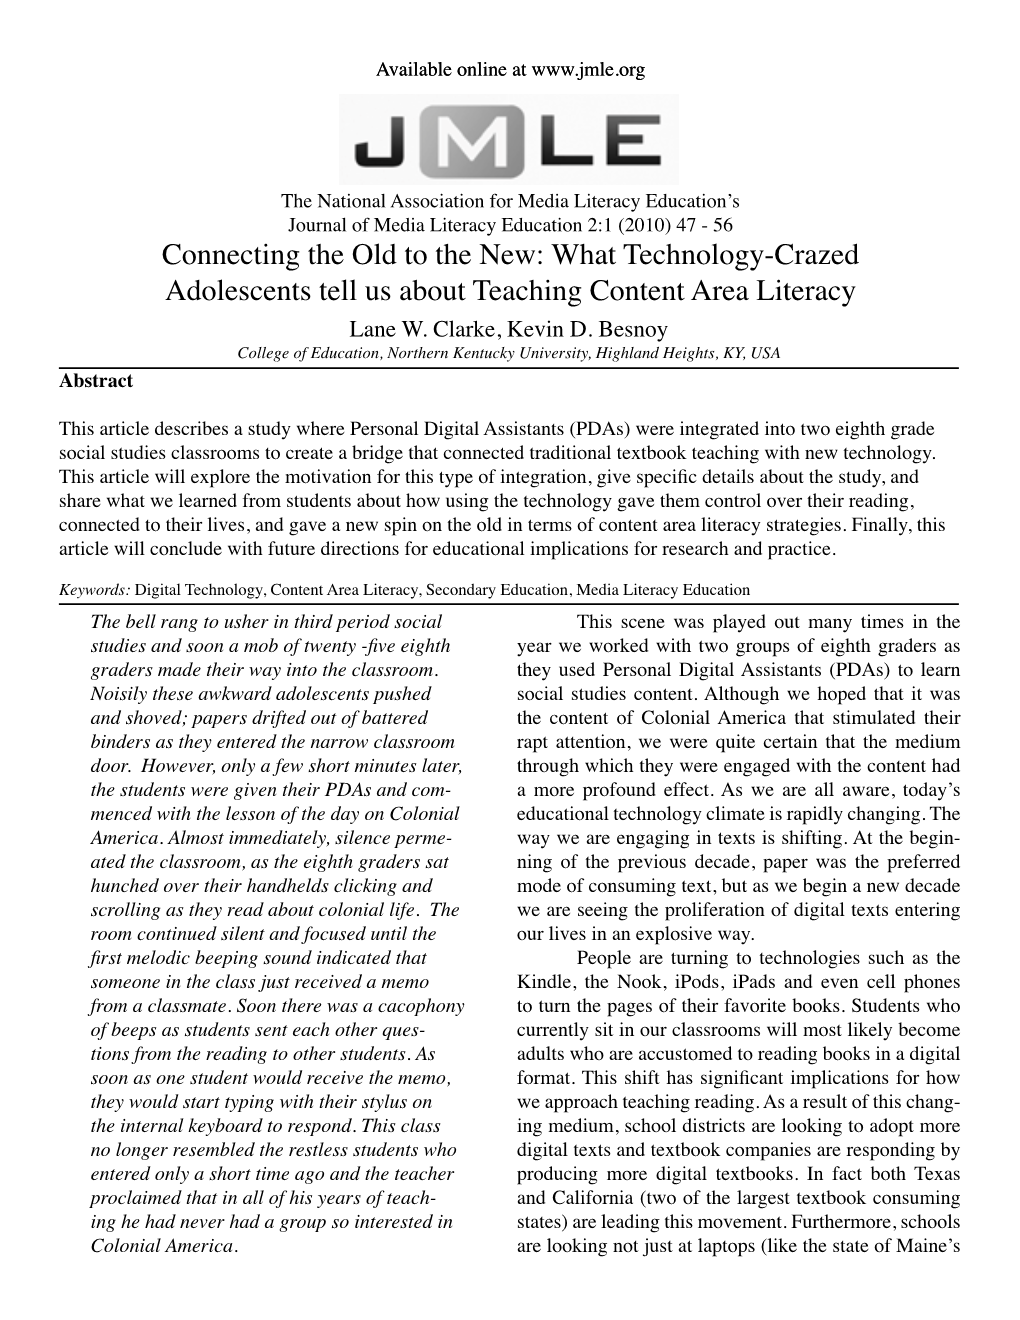 What Technology-Crazed Adolescents Tell Us About Teaching Content Area Literacy Lane W